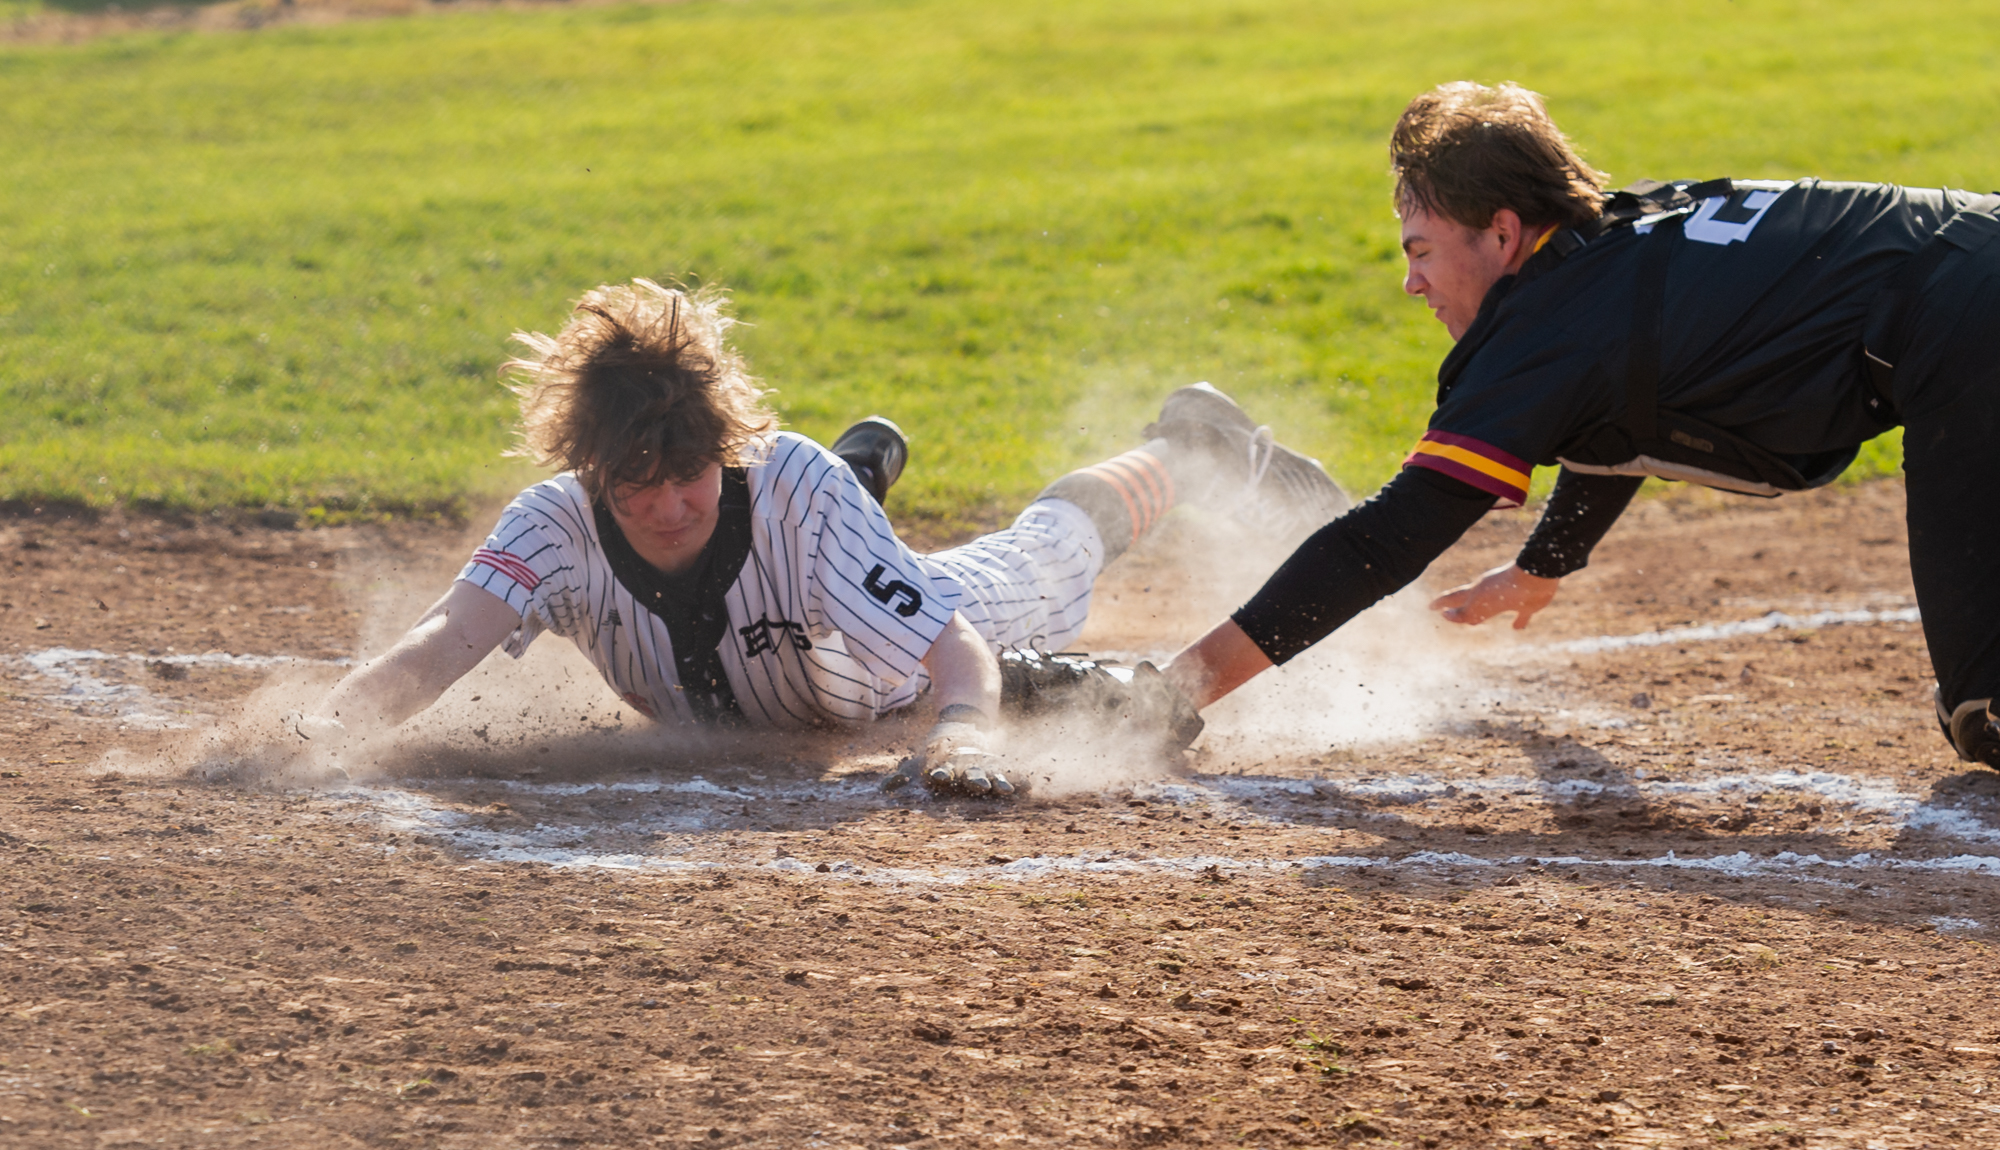 Battle Ground's Carter Hotchkiss beats the tag from Prairie's Colin Schiller in a 4A/3A Greater St. Helens League baseball game on Thursday, March 24, 2022, at Prairie High School. Battle Ground won 2-0.